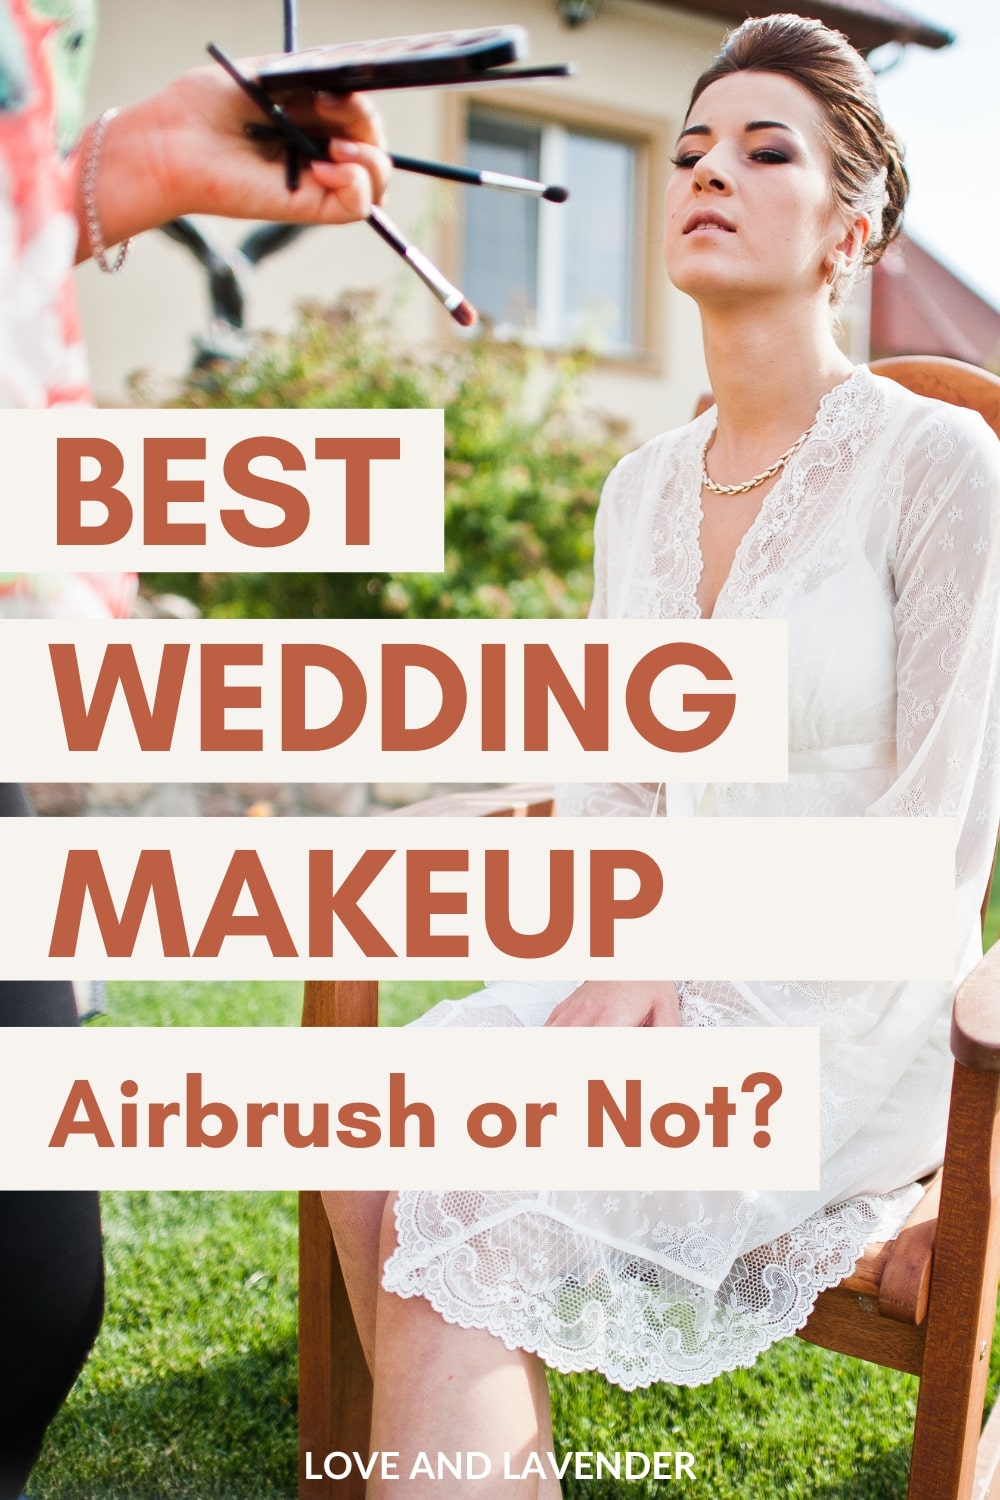 Need help deciding between an airbrush and traditional makeup for your wedding day? Check out this helpful article that breaks down the pros and cons of each method in the blog!